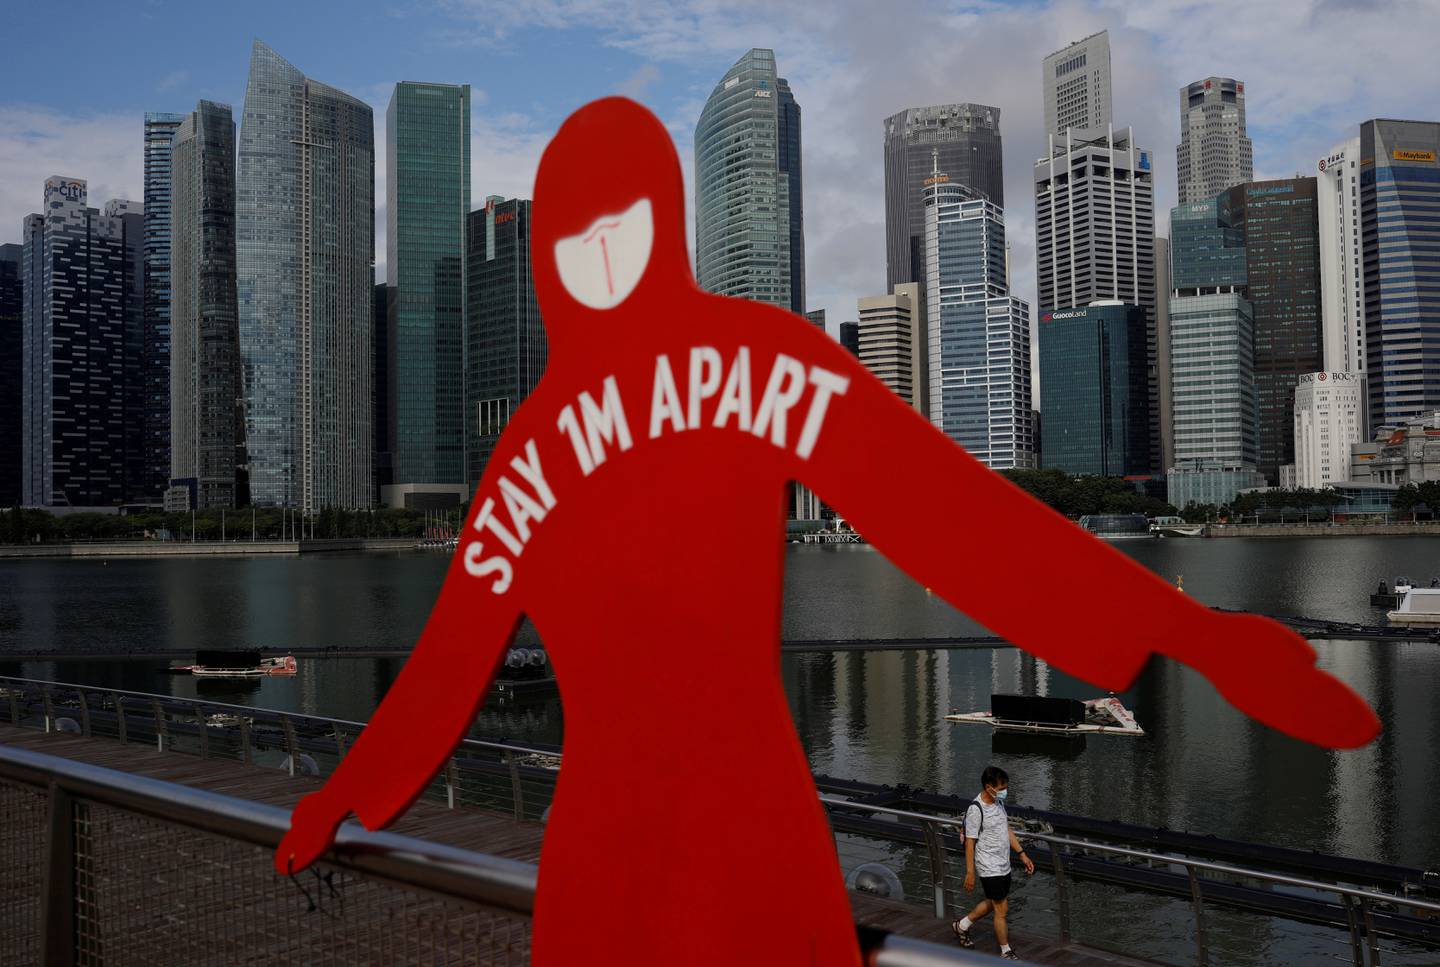 Vaccinated travellers will be able to visit Singapore's tourism spots, but must follow rules in place to fight the Covid-19 pandemic. Reuters / Edgar Su